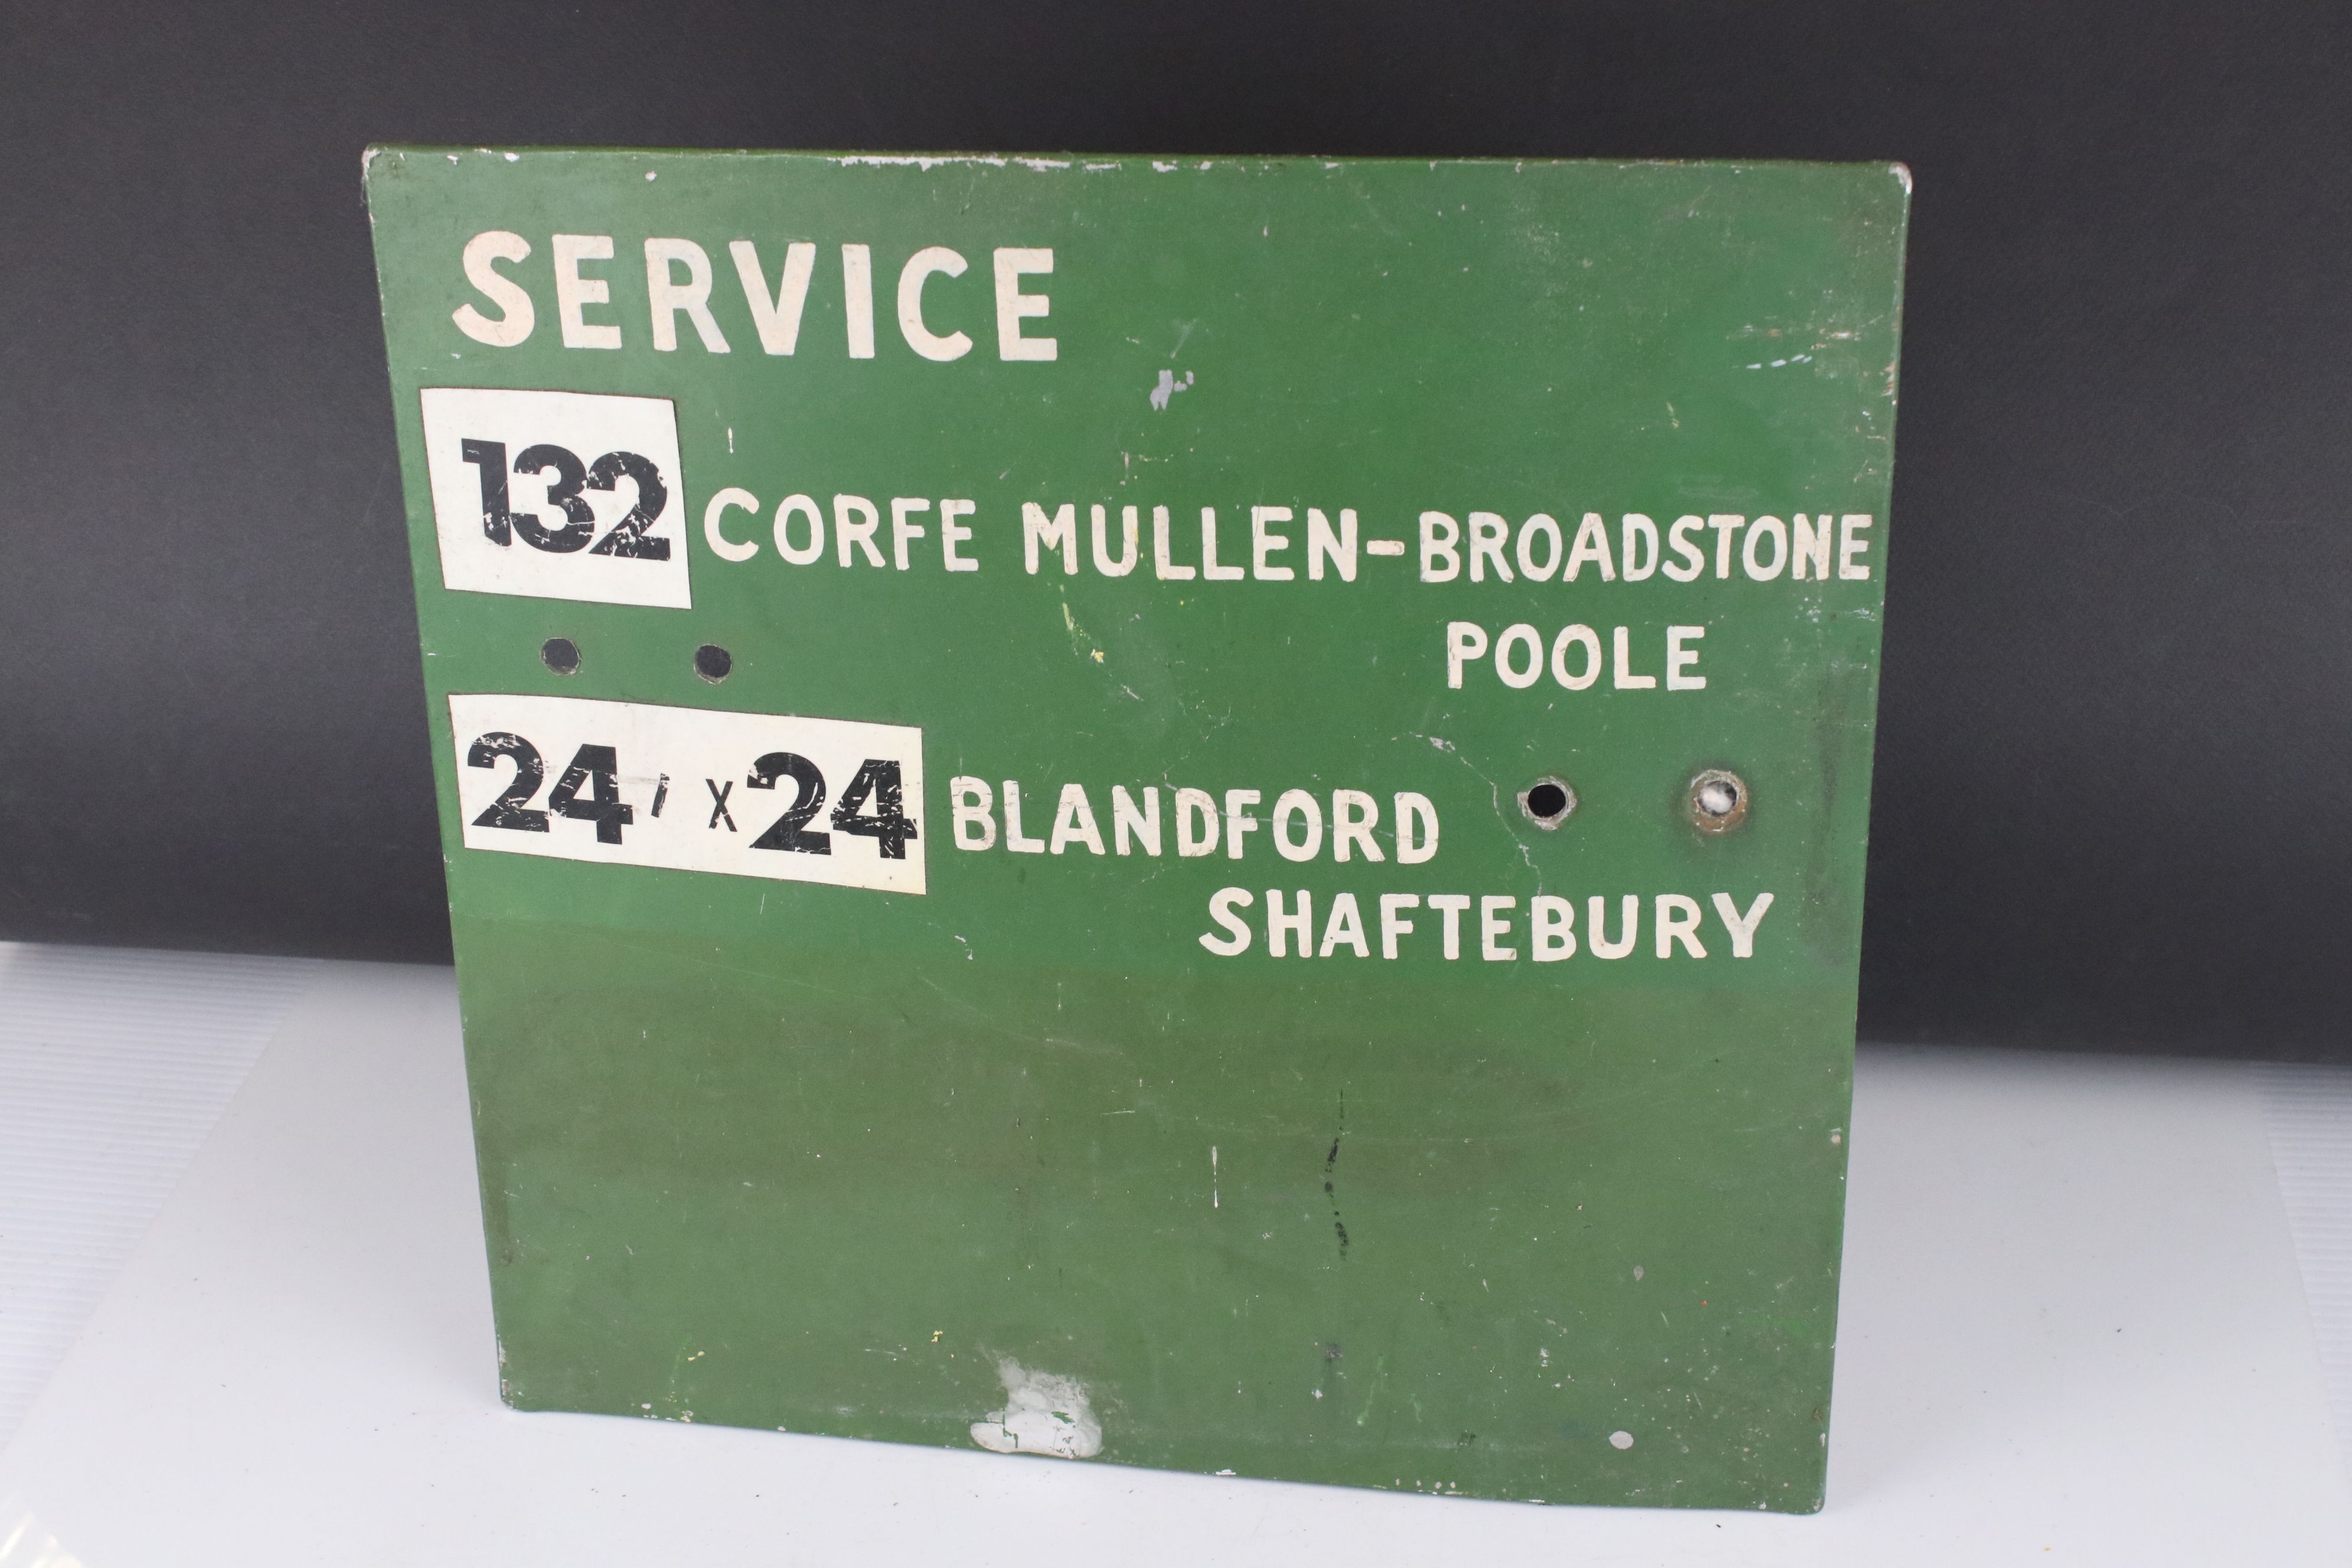 Three Mid 20th century Double Sided Metal Bus Service Signs covering Ferndown, Bournemouth, - Image 5 of 9